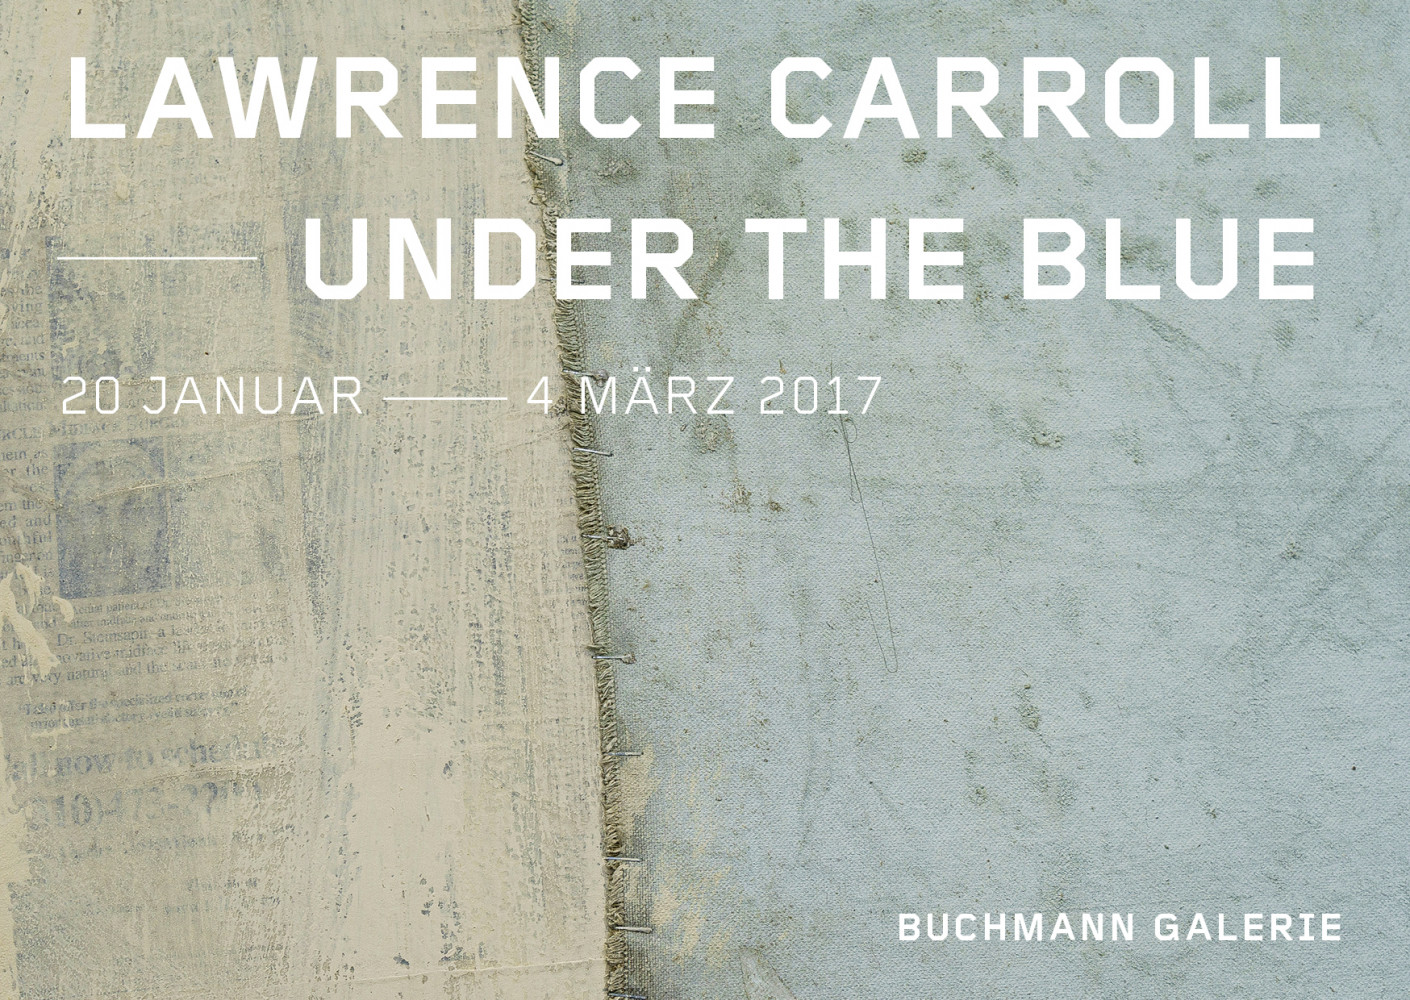 Lawrence Carroll, ‘Under the Blue’